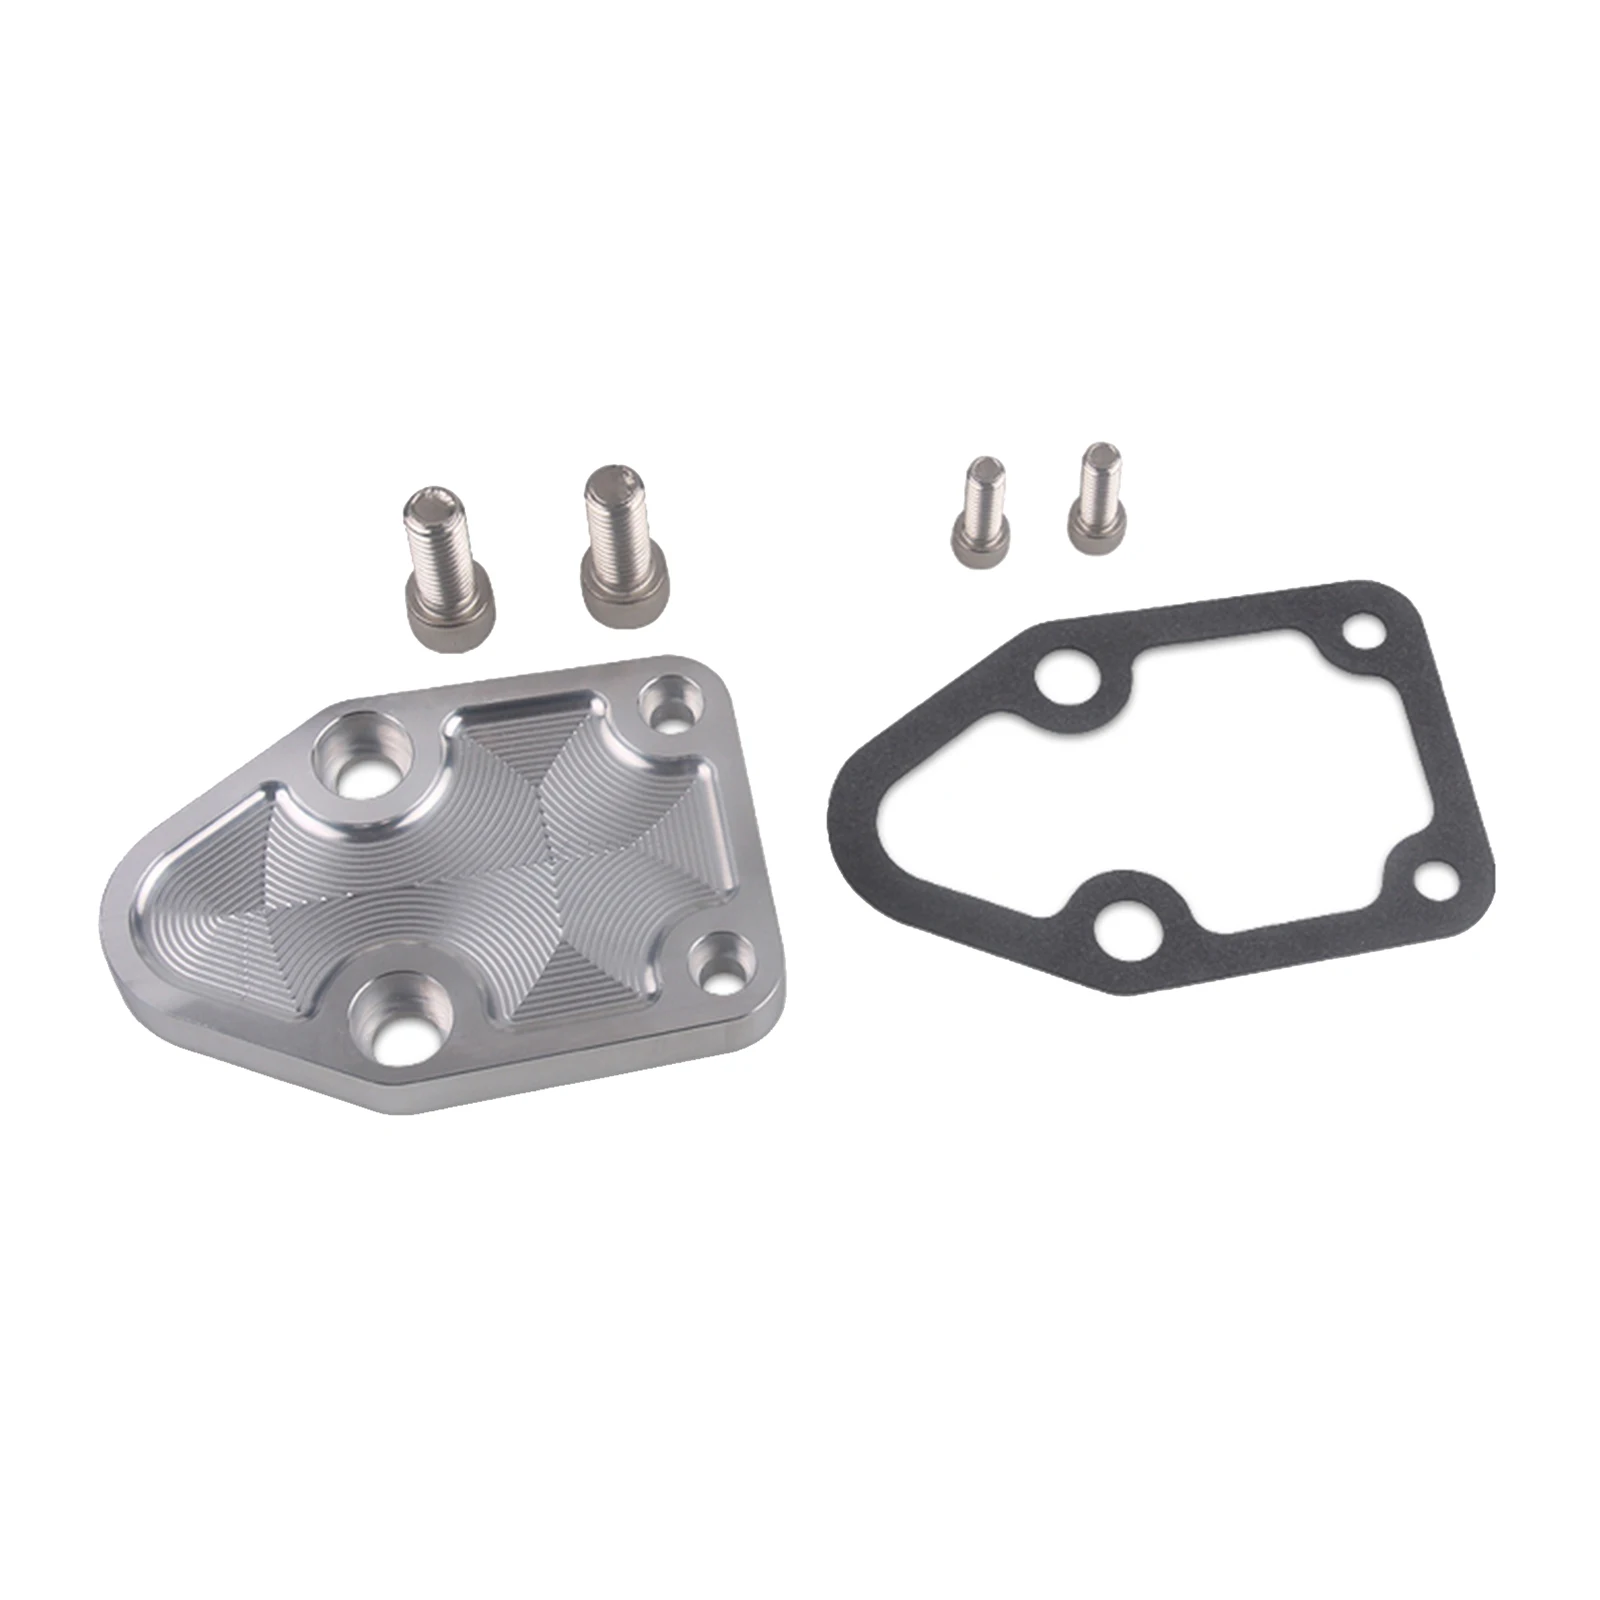 Fuel Pump Mounting Plate Replacement Suitable for 283 327 350 400 ,Durable Material